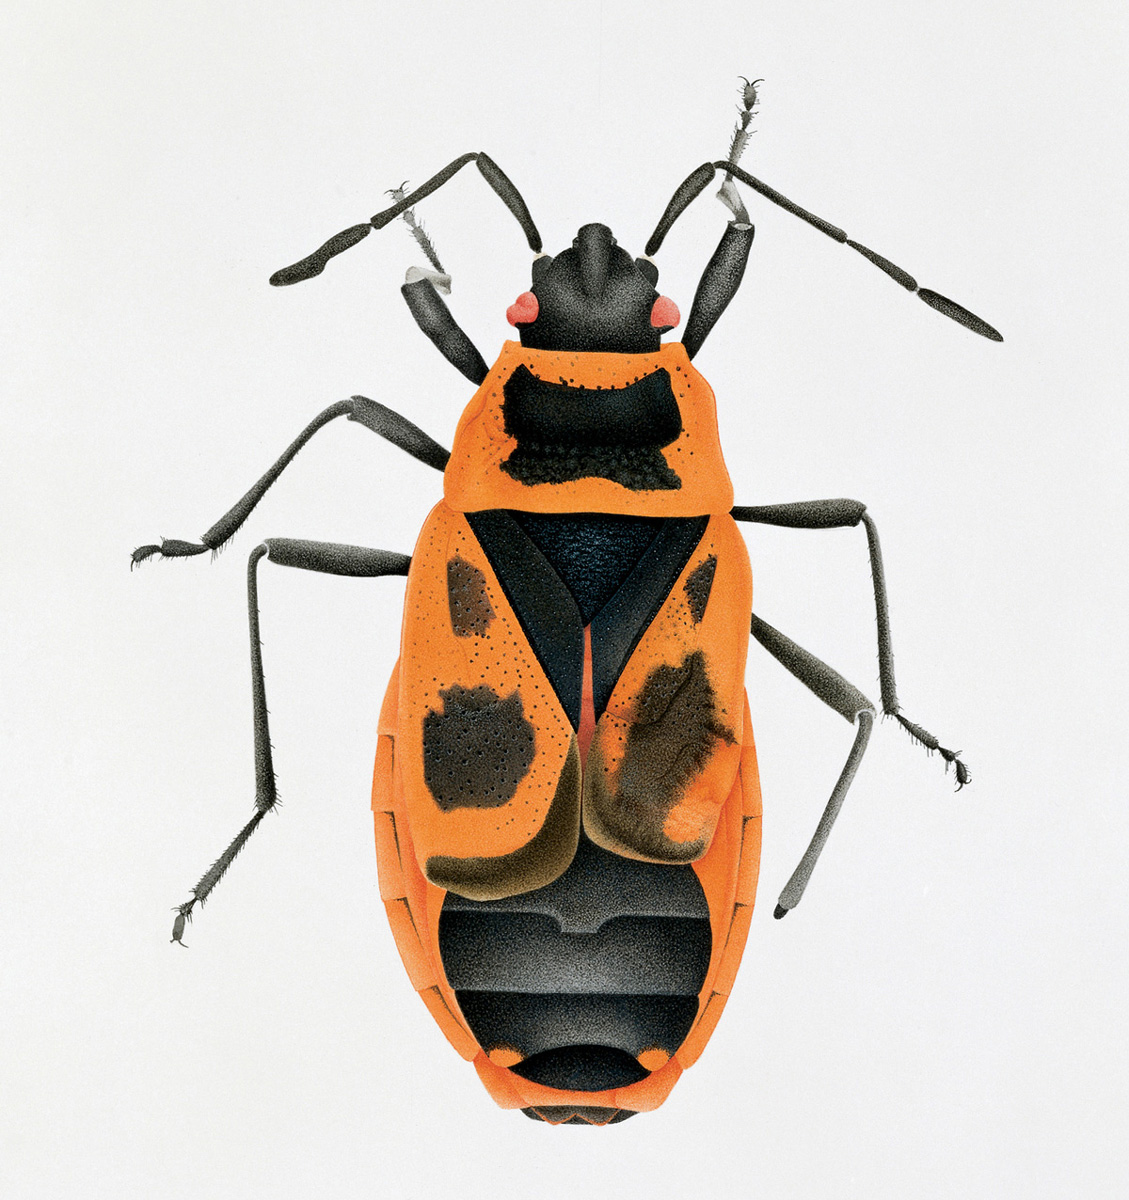 Fire bug, Phyrrhocoris apterus, 1991. This specimen from former East Berlin is badly damaged. It has a large bump on the thorax and the chitin surface is dusty and dull. The left feeler has only three segments and is misshapen. The right hind leg is deformed and missing a foot. The rims of the neck plate are damaged, and the left eye is indented.